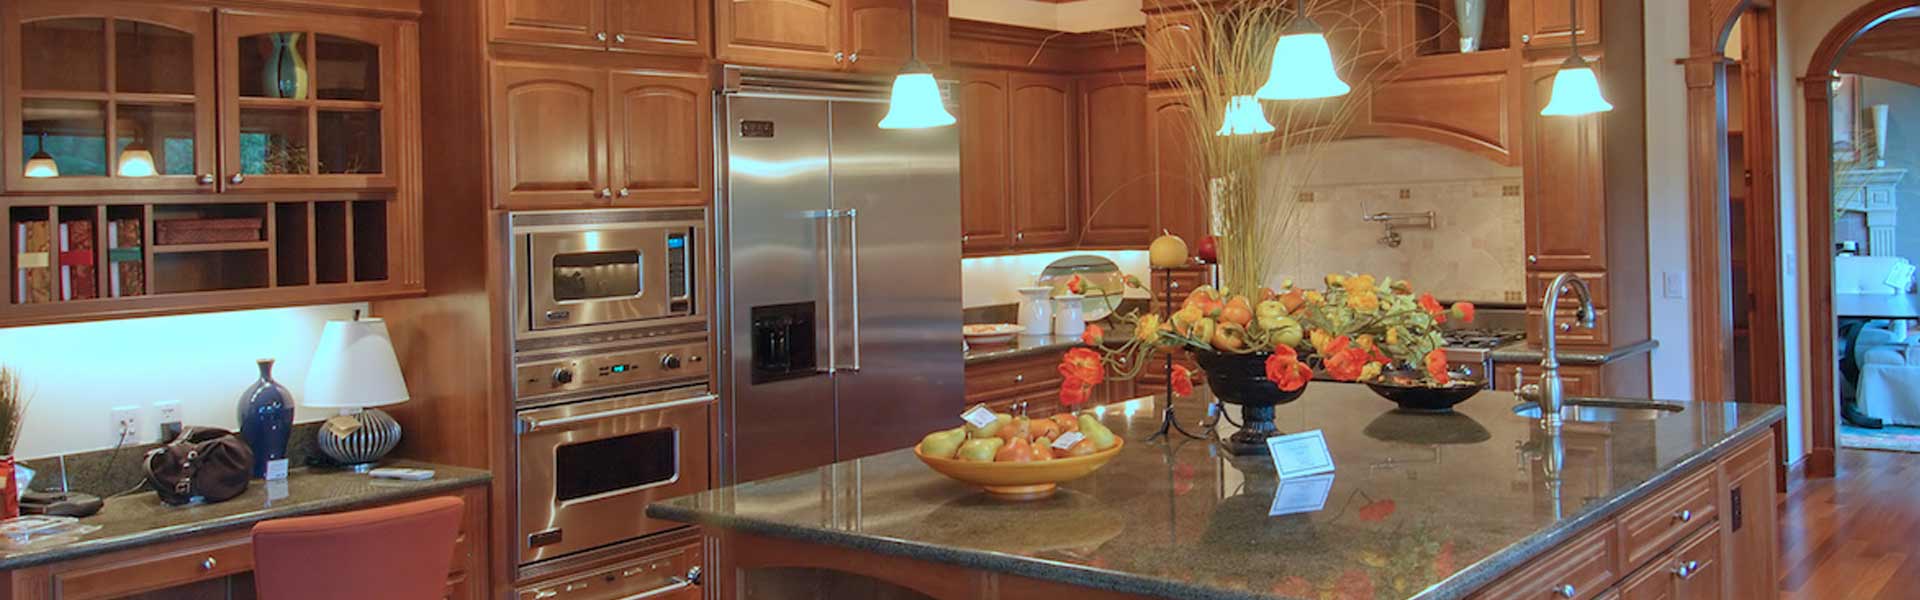 kitchen-remodeling-contractor-ls - Capital Real Estate Construction